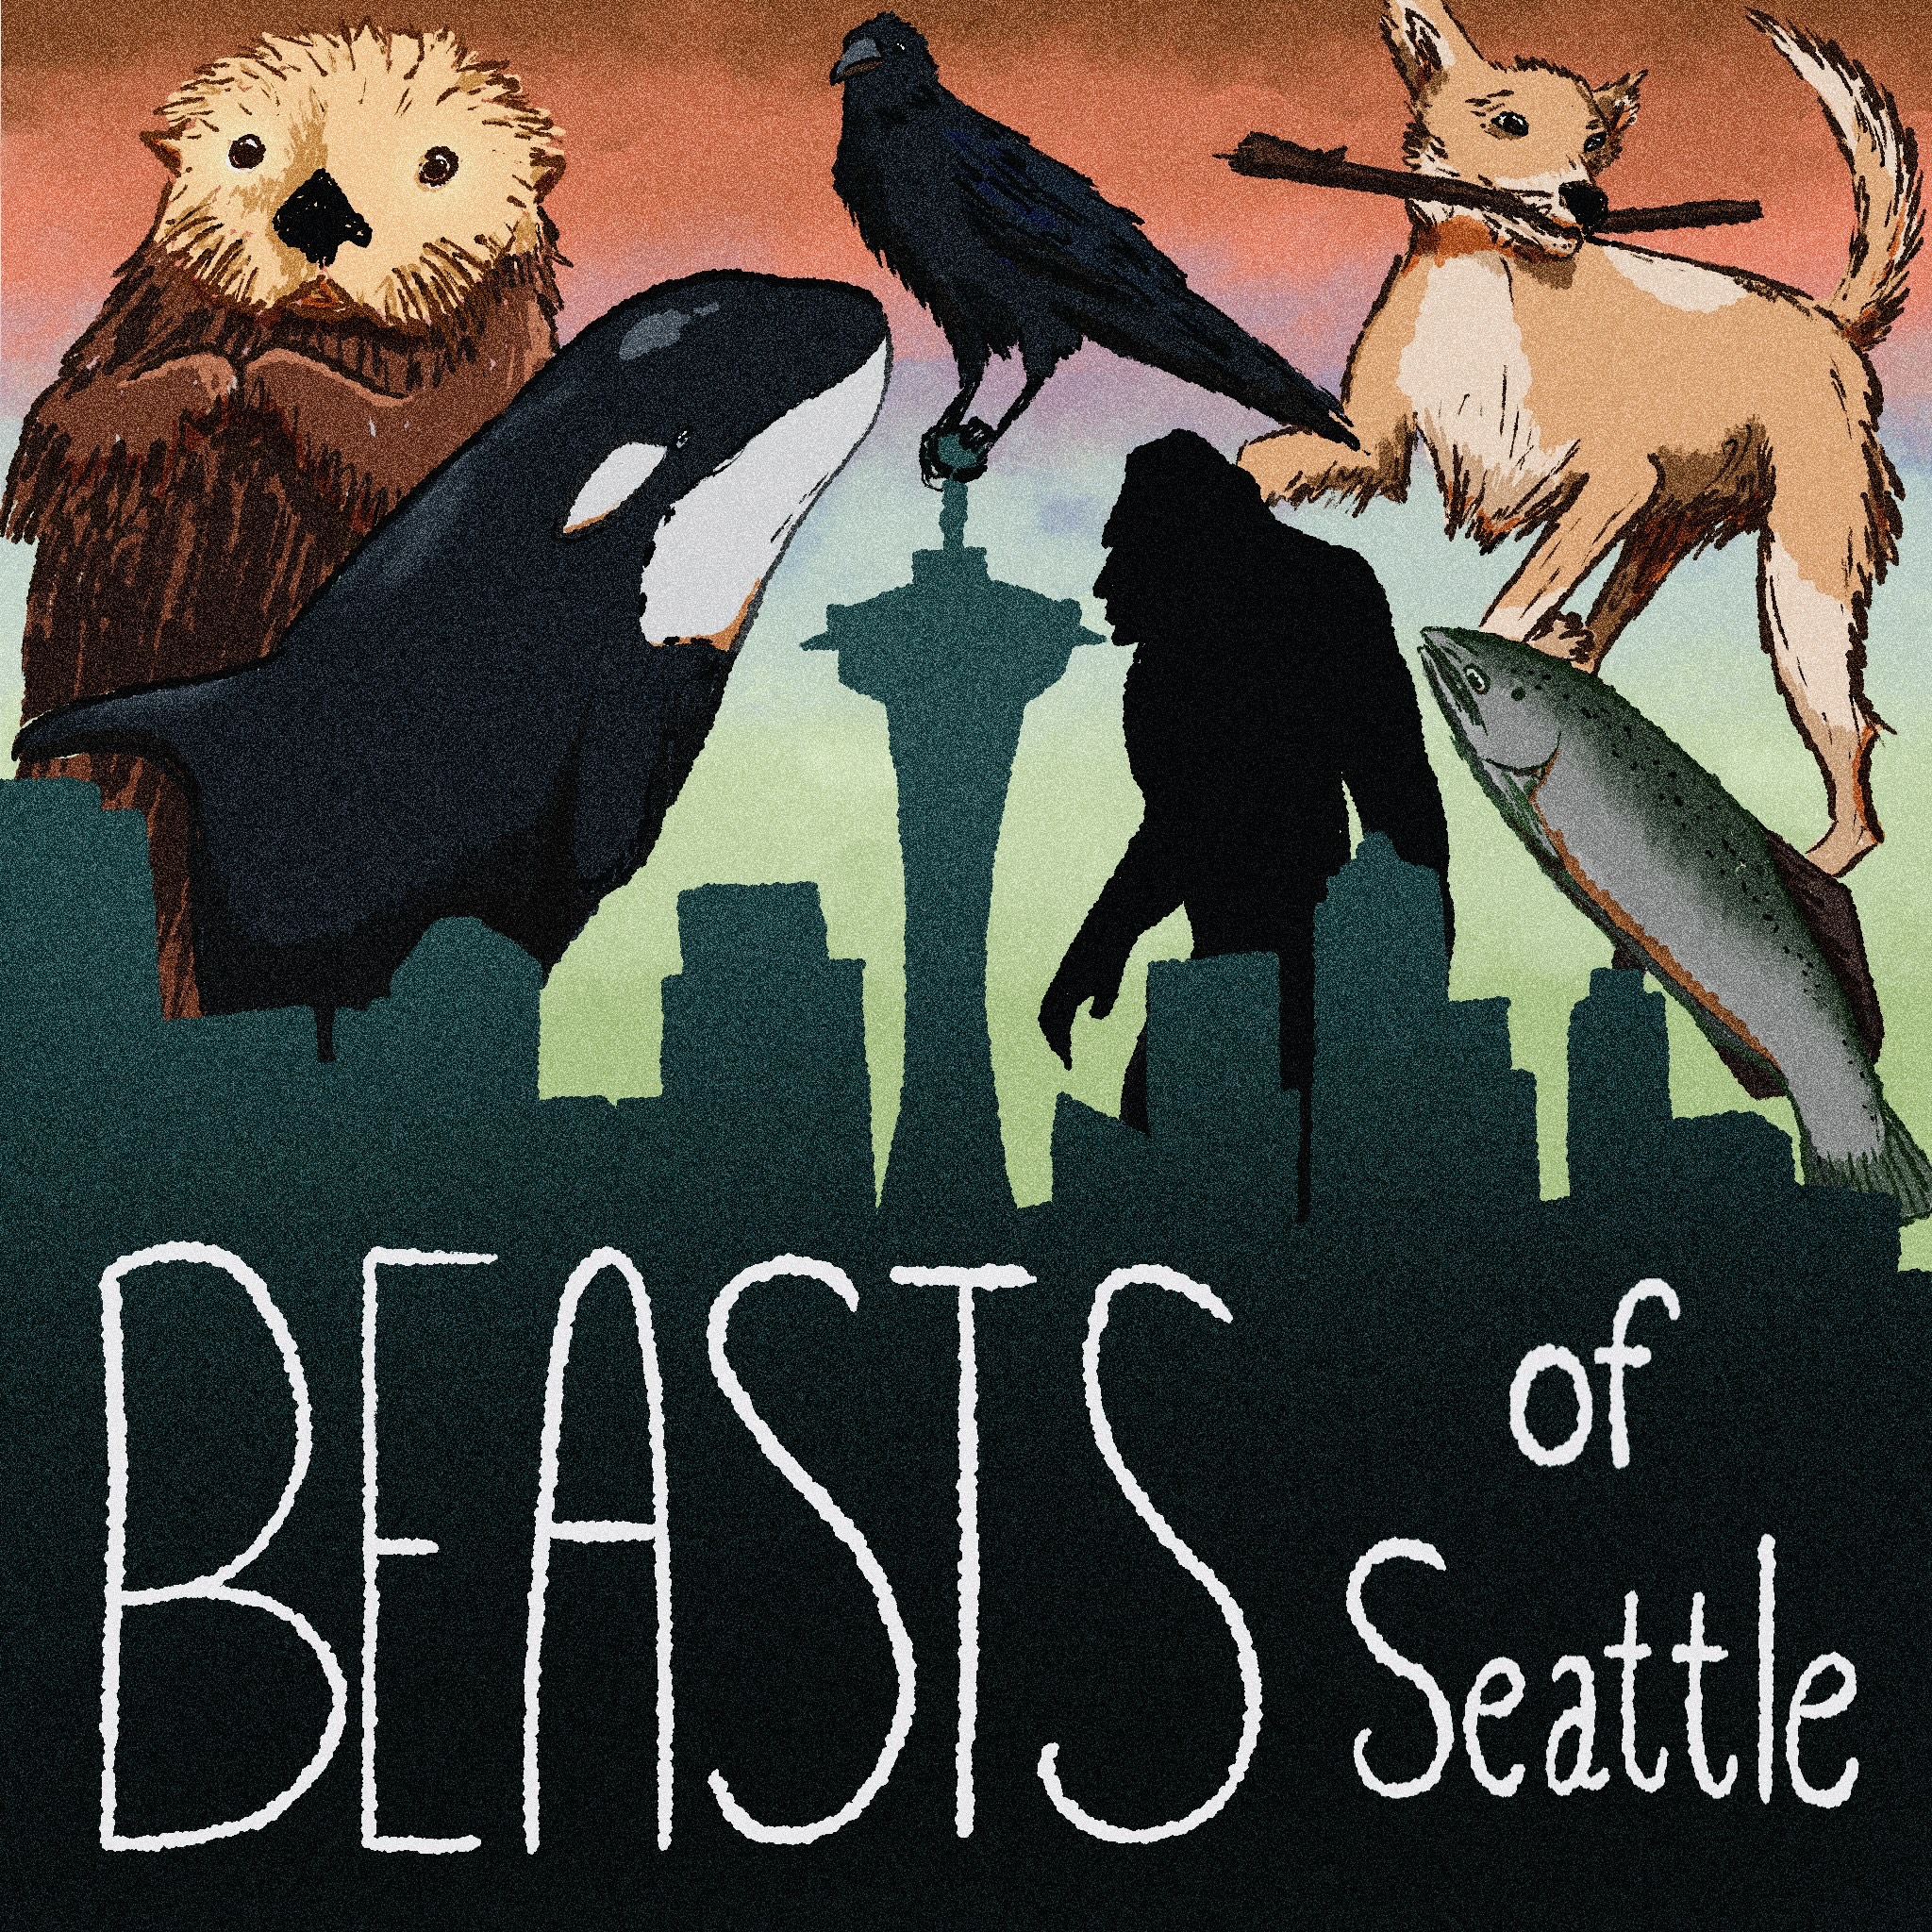 Image with words Beasts of Seattle and drawings of animals